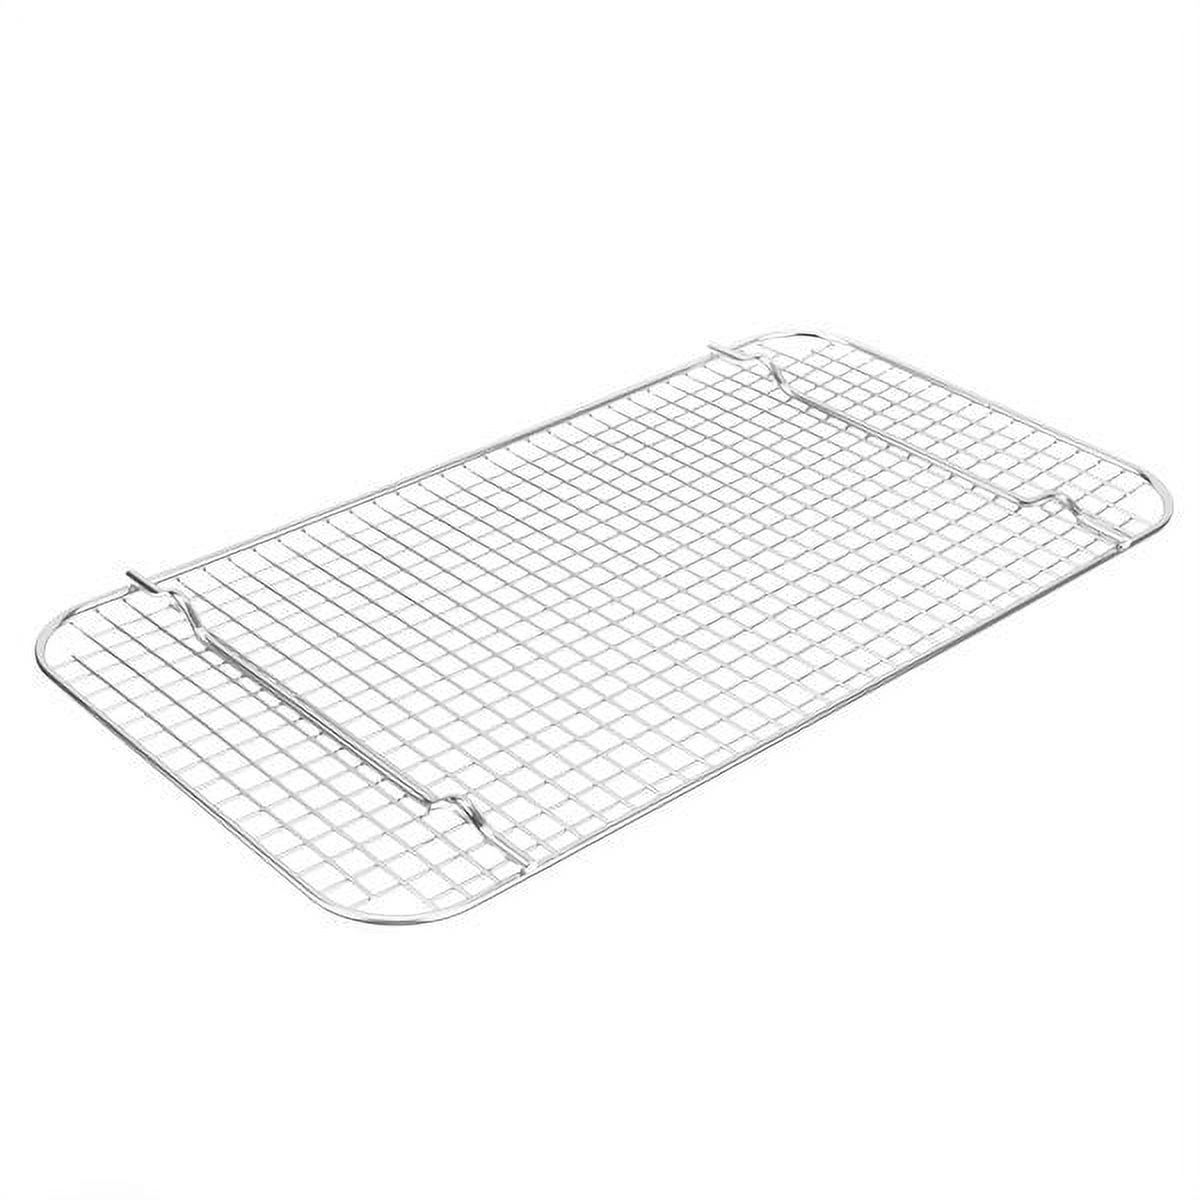 Vollrath Full Size Stainless Steel Wire Cooling Rack / Pan Grate for Steam Table Pan - image 2 of 3